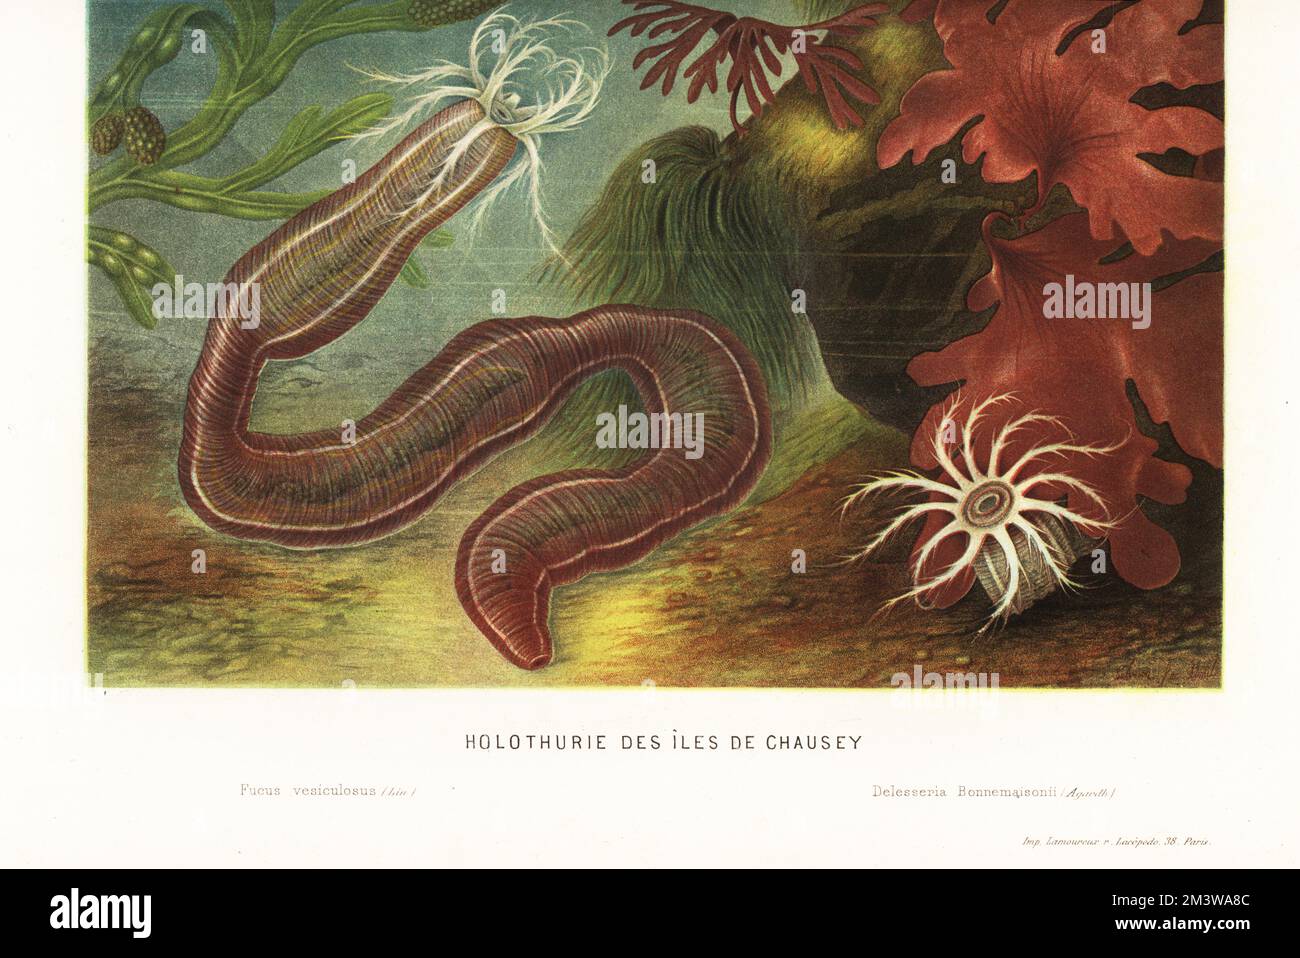 Sea cucumber, Holothuria arguinensis?, from the Chausey islands, Atlantic. With bladder wrack seaweed, Fucus vesiculosus, and red algae, Polyneura bonnemaisonii. Holothurie des iles de Chausey. Chromolithograph by Pierre Lackerbauer from Alfred Fredol’s Le Monde de la Mer, the World of the Sea, edited by Olivier Fredol, Librairie Hachette et. Cie., Paris, 1881. Alfred Fredol was the pseudonym of French zoologist and botanist Alfred Moquin-Tandon, 1804-1863. Stock Photo